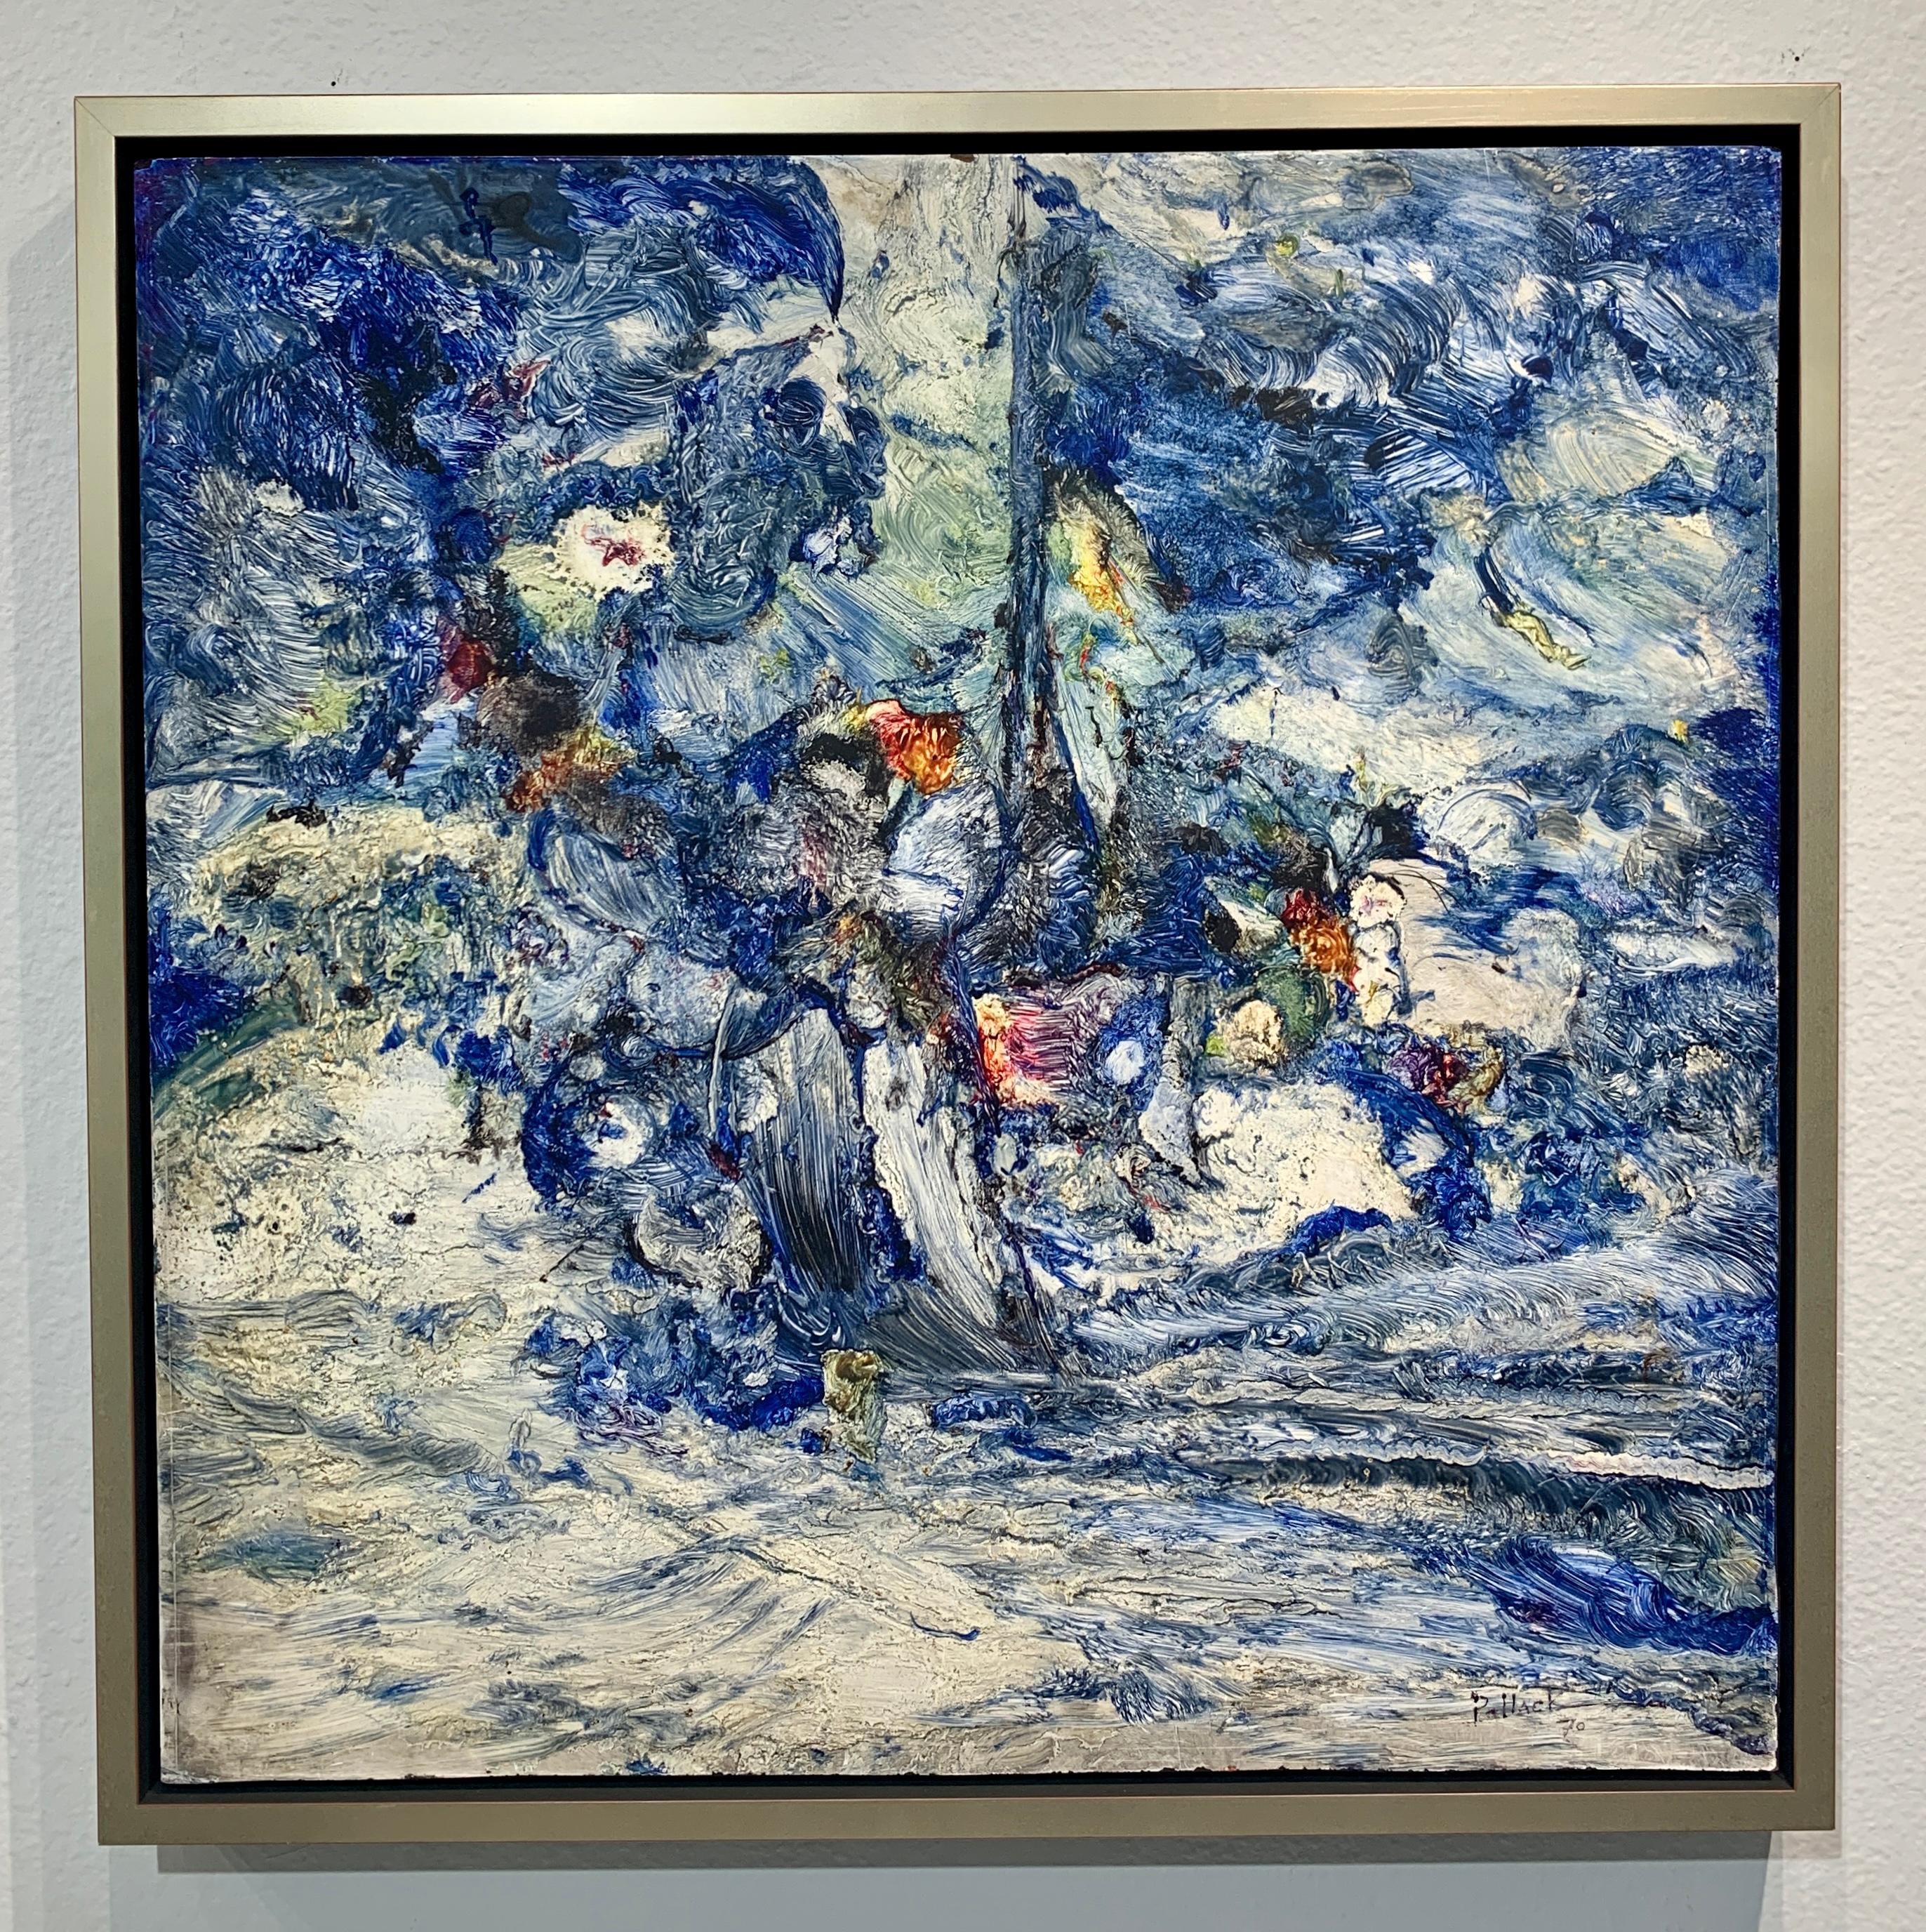 God Creates the Sea, Reginald Pollack Abstract Expressionist Oil Masonite 1970 Framed

An early work.

Oil on Masonite painting by late American Artist Reginald Pollack.  It has a 1/4" to 3/8" white masonite border.  A new black frame is available,